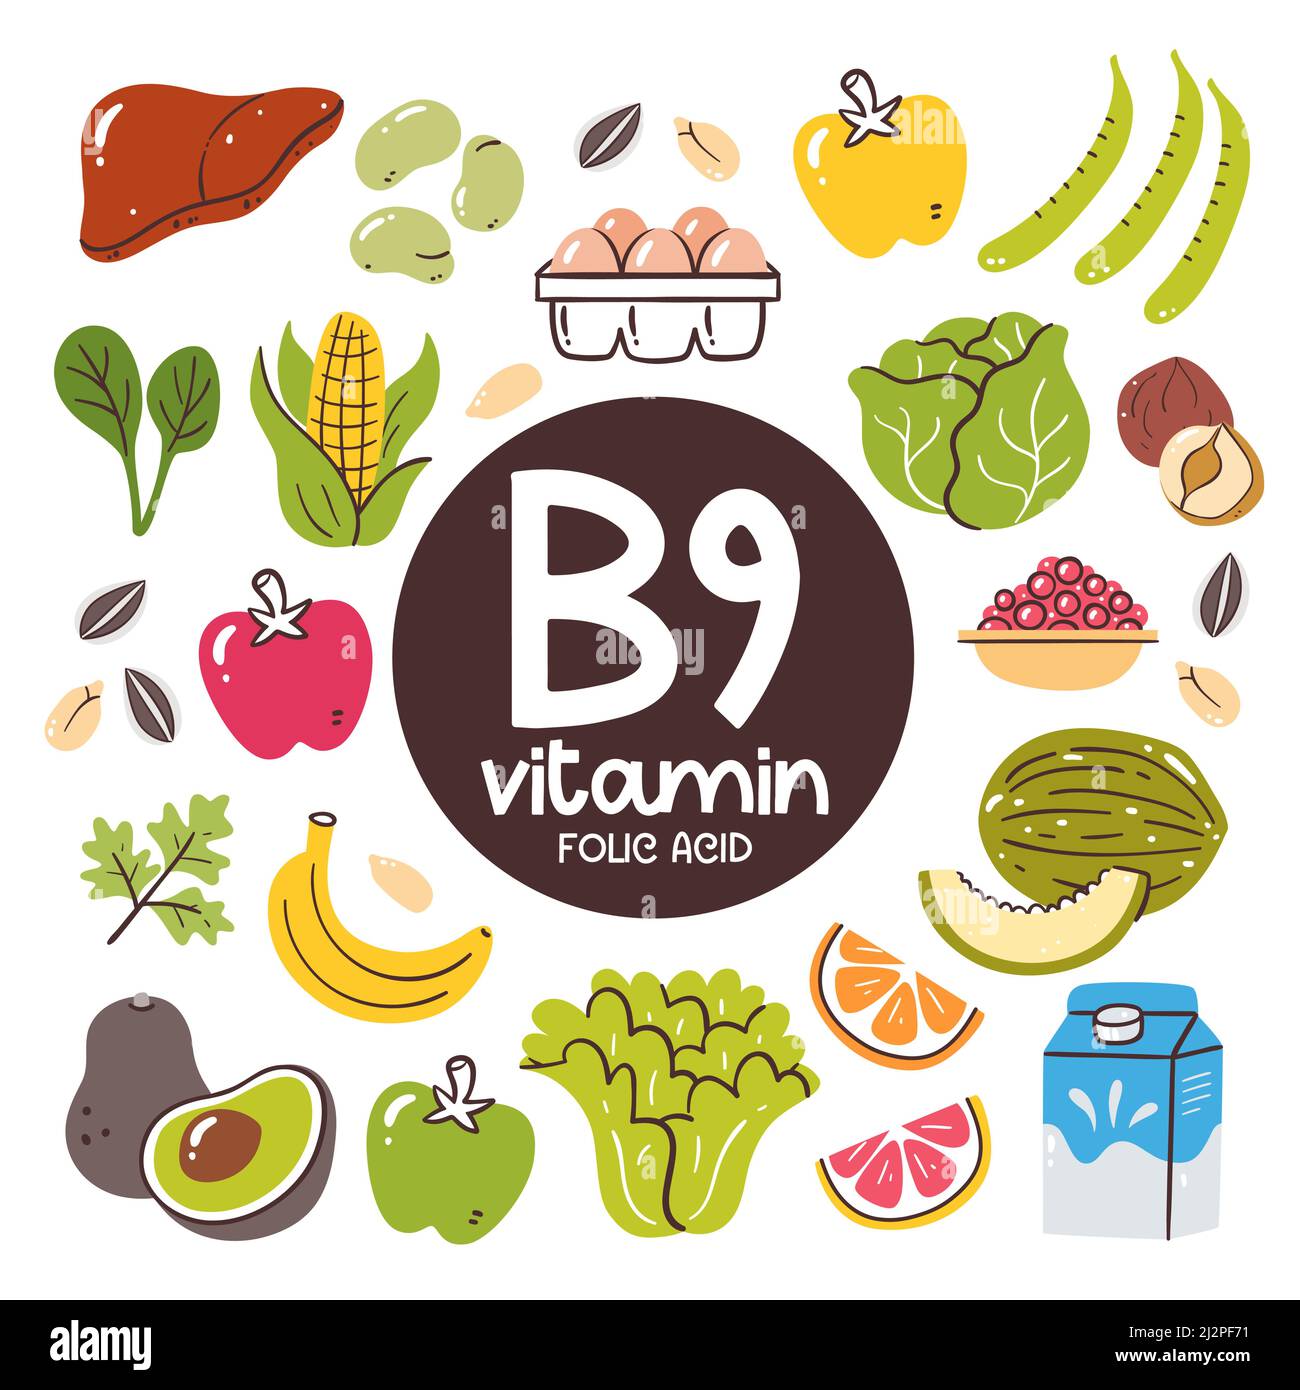 Food products with high level of Vitamin B9 (Folic acid). Cooking ingredients. Fruits, vegetables, milk, liver, eggs, nuts. Stock Vector